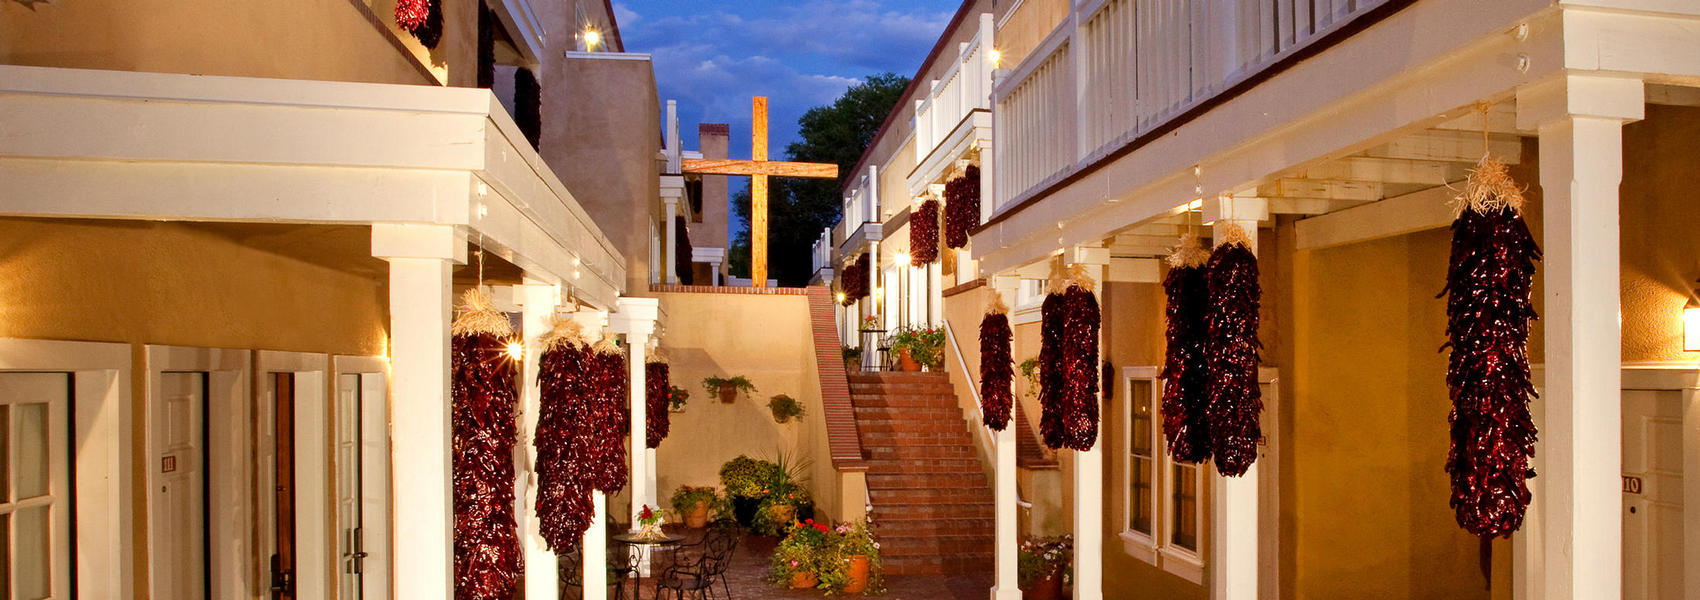 Hotel Chimayo patio with chile ristras